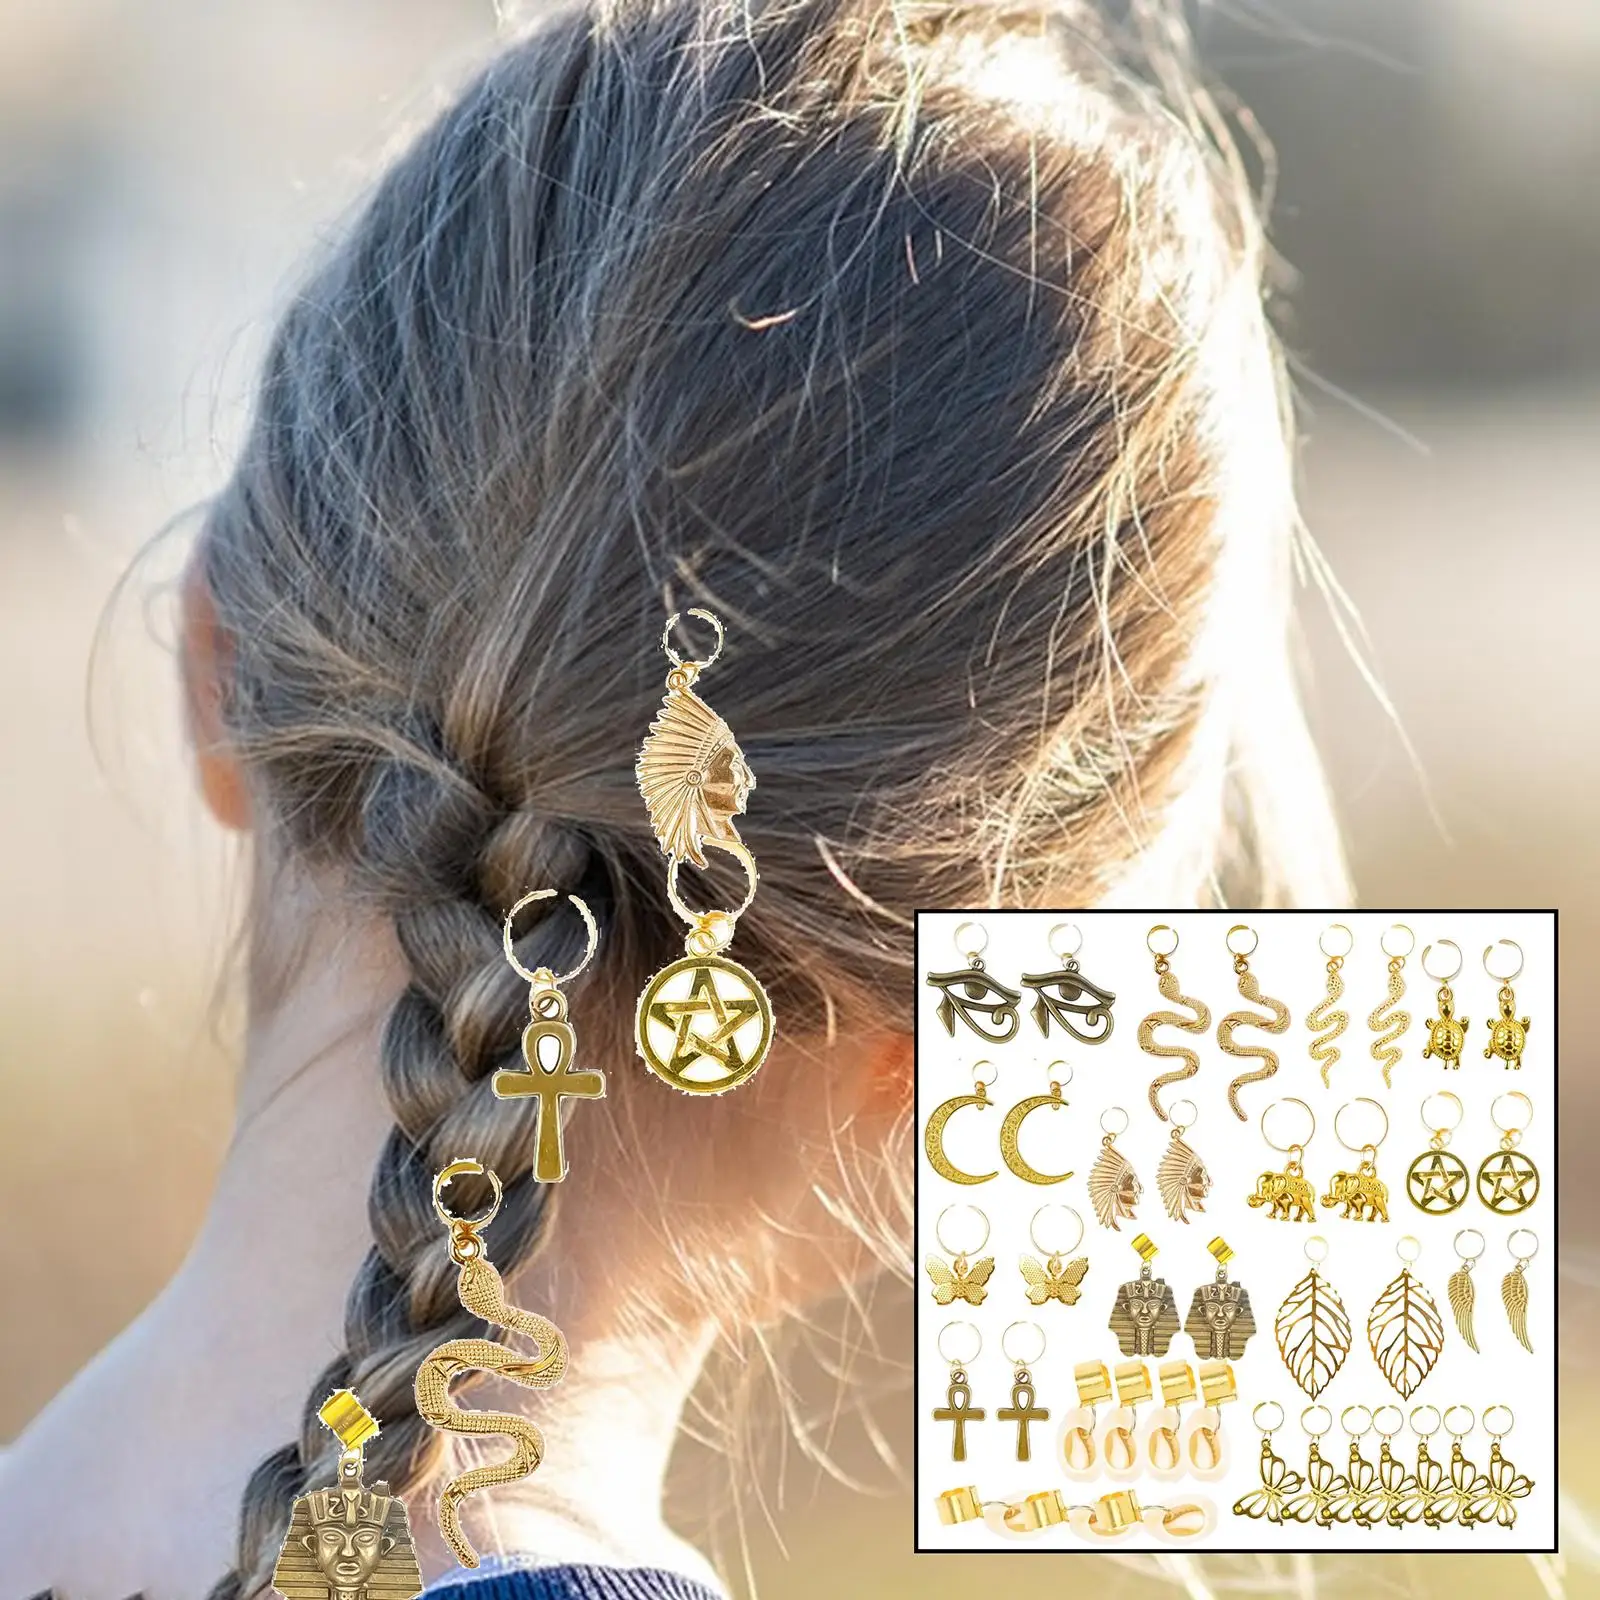 40 Count Jewelry Braids Hair Clips Dreadlocks Hair Charms Premium Material ,15 Styles Fashionable Hair Rings Exquisite Flexible